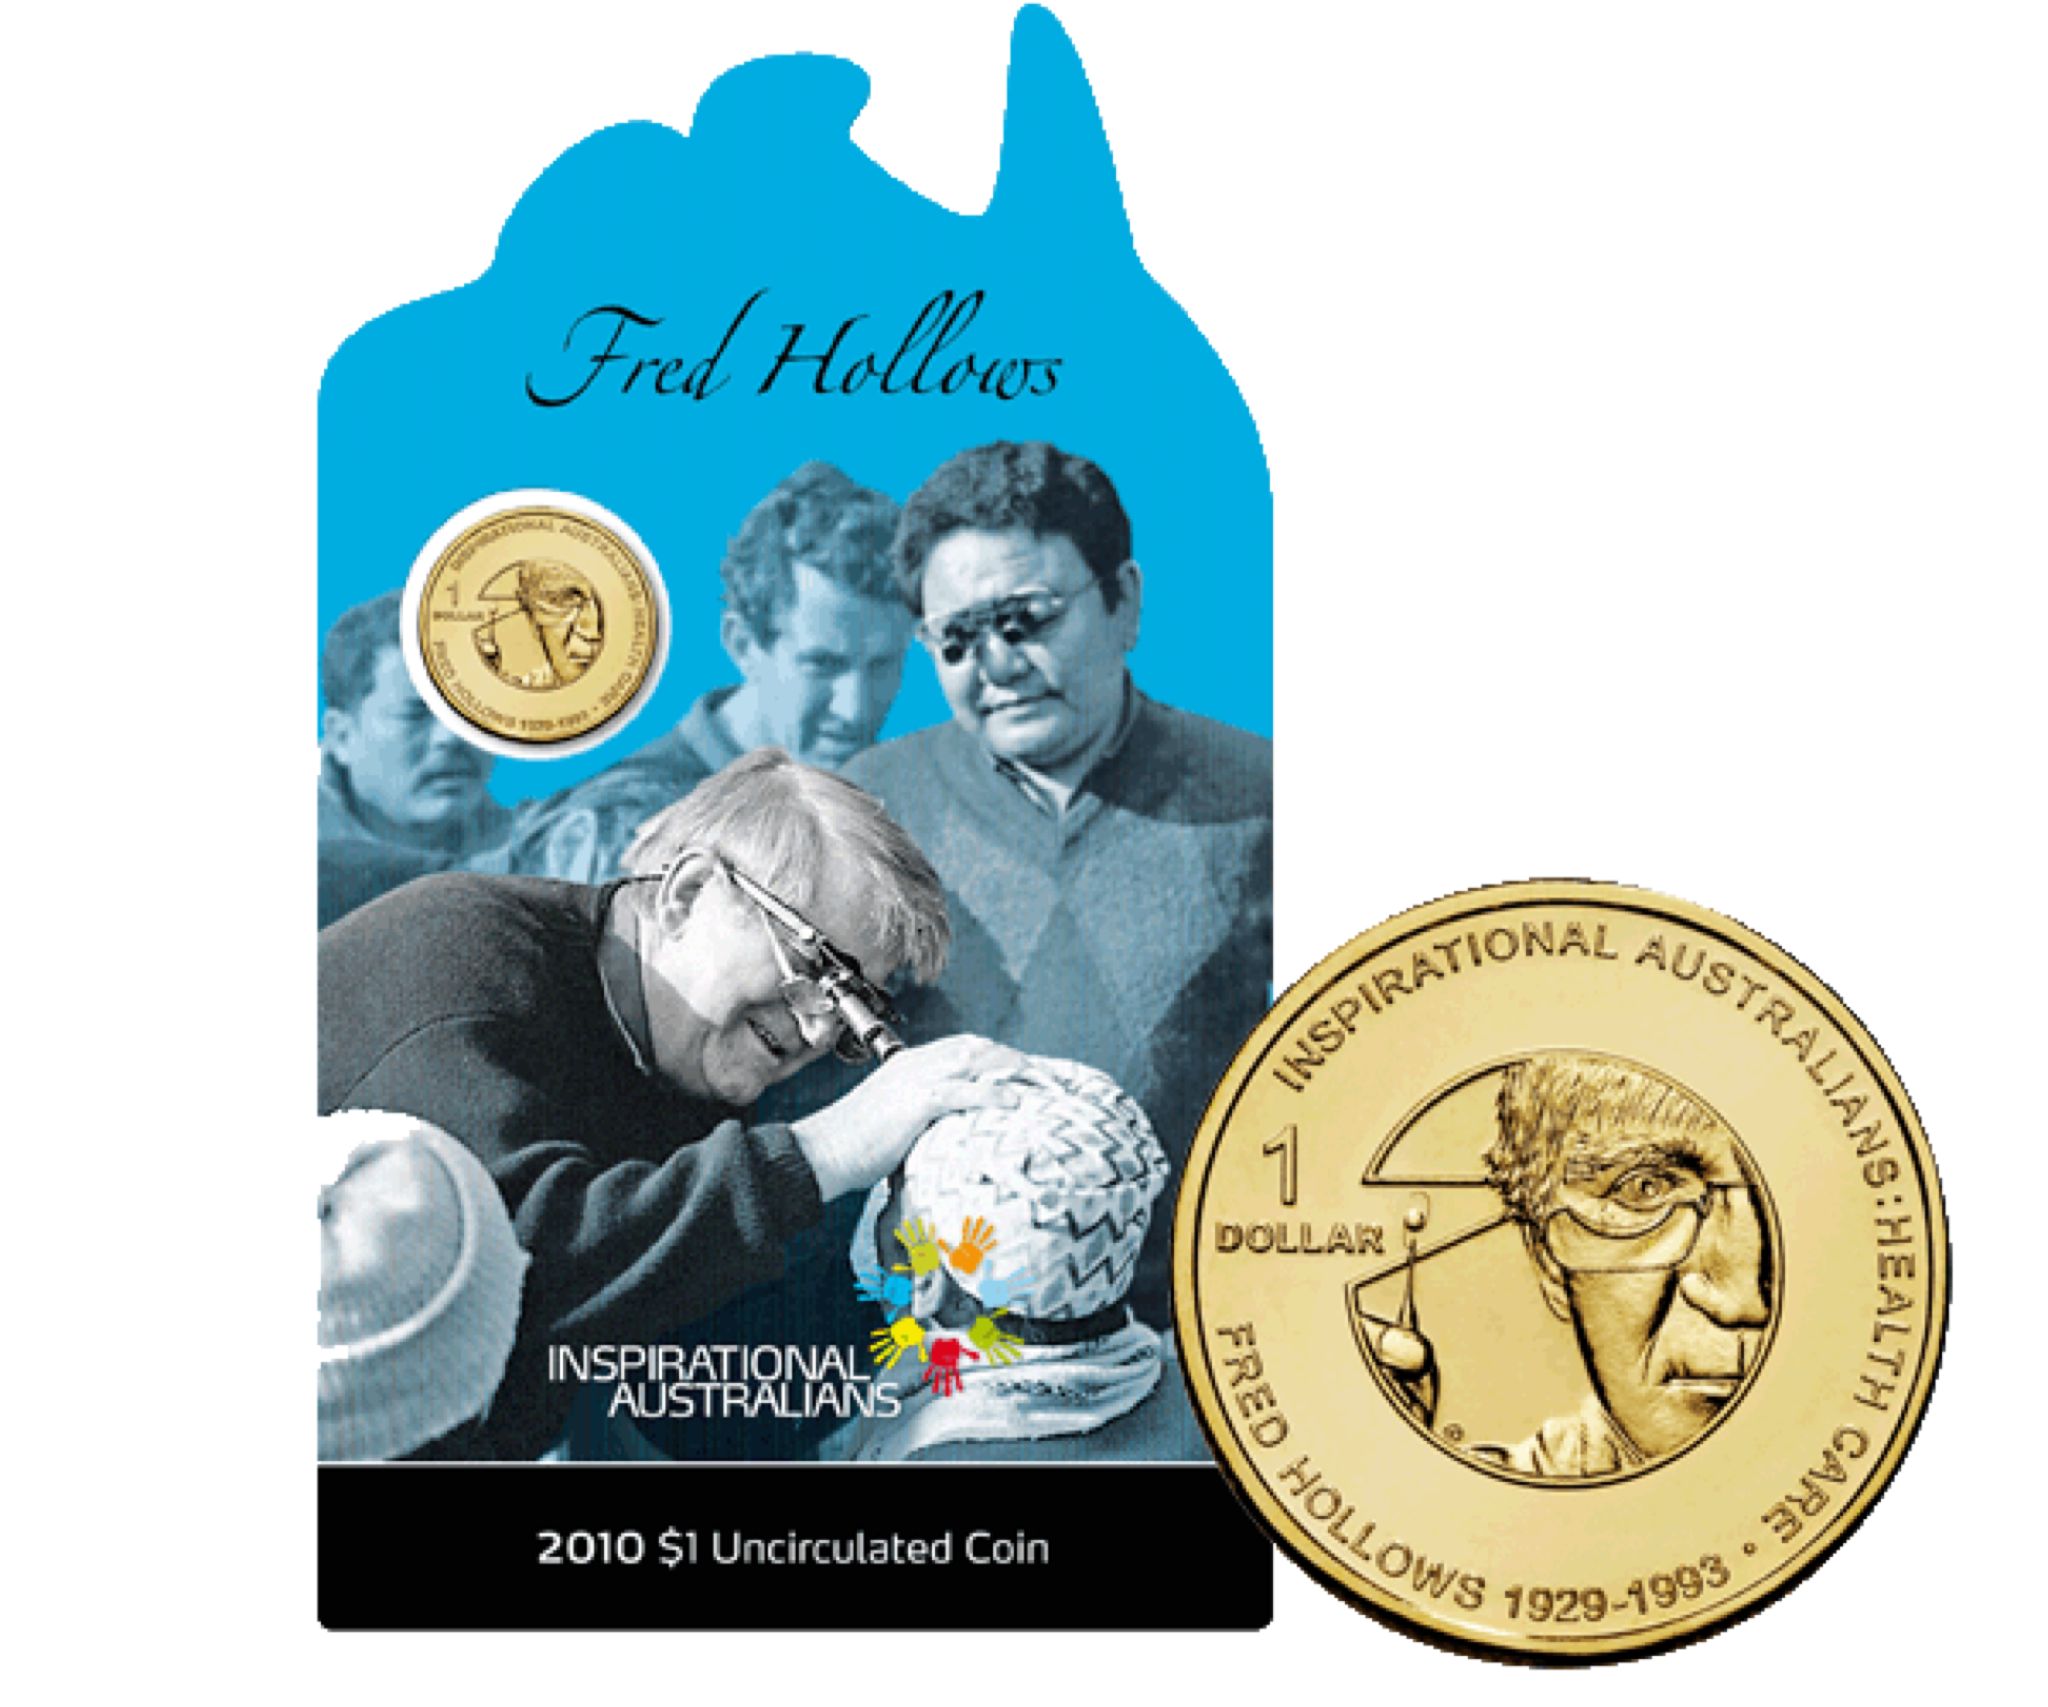 2010 $1 Uncirculated Inspirational Australians - Fred Hollows  coin collectible [Barcode 9314688034167] - Main Image 1